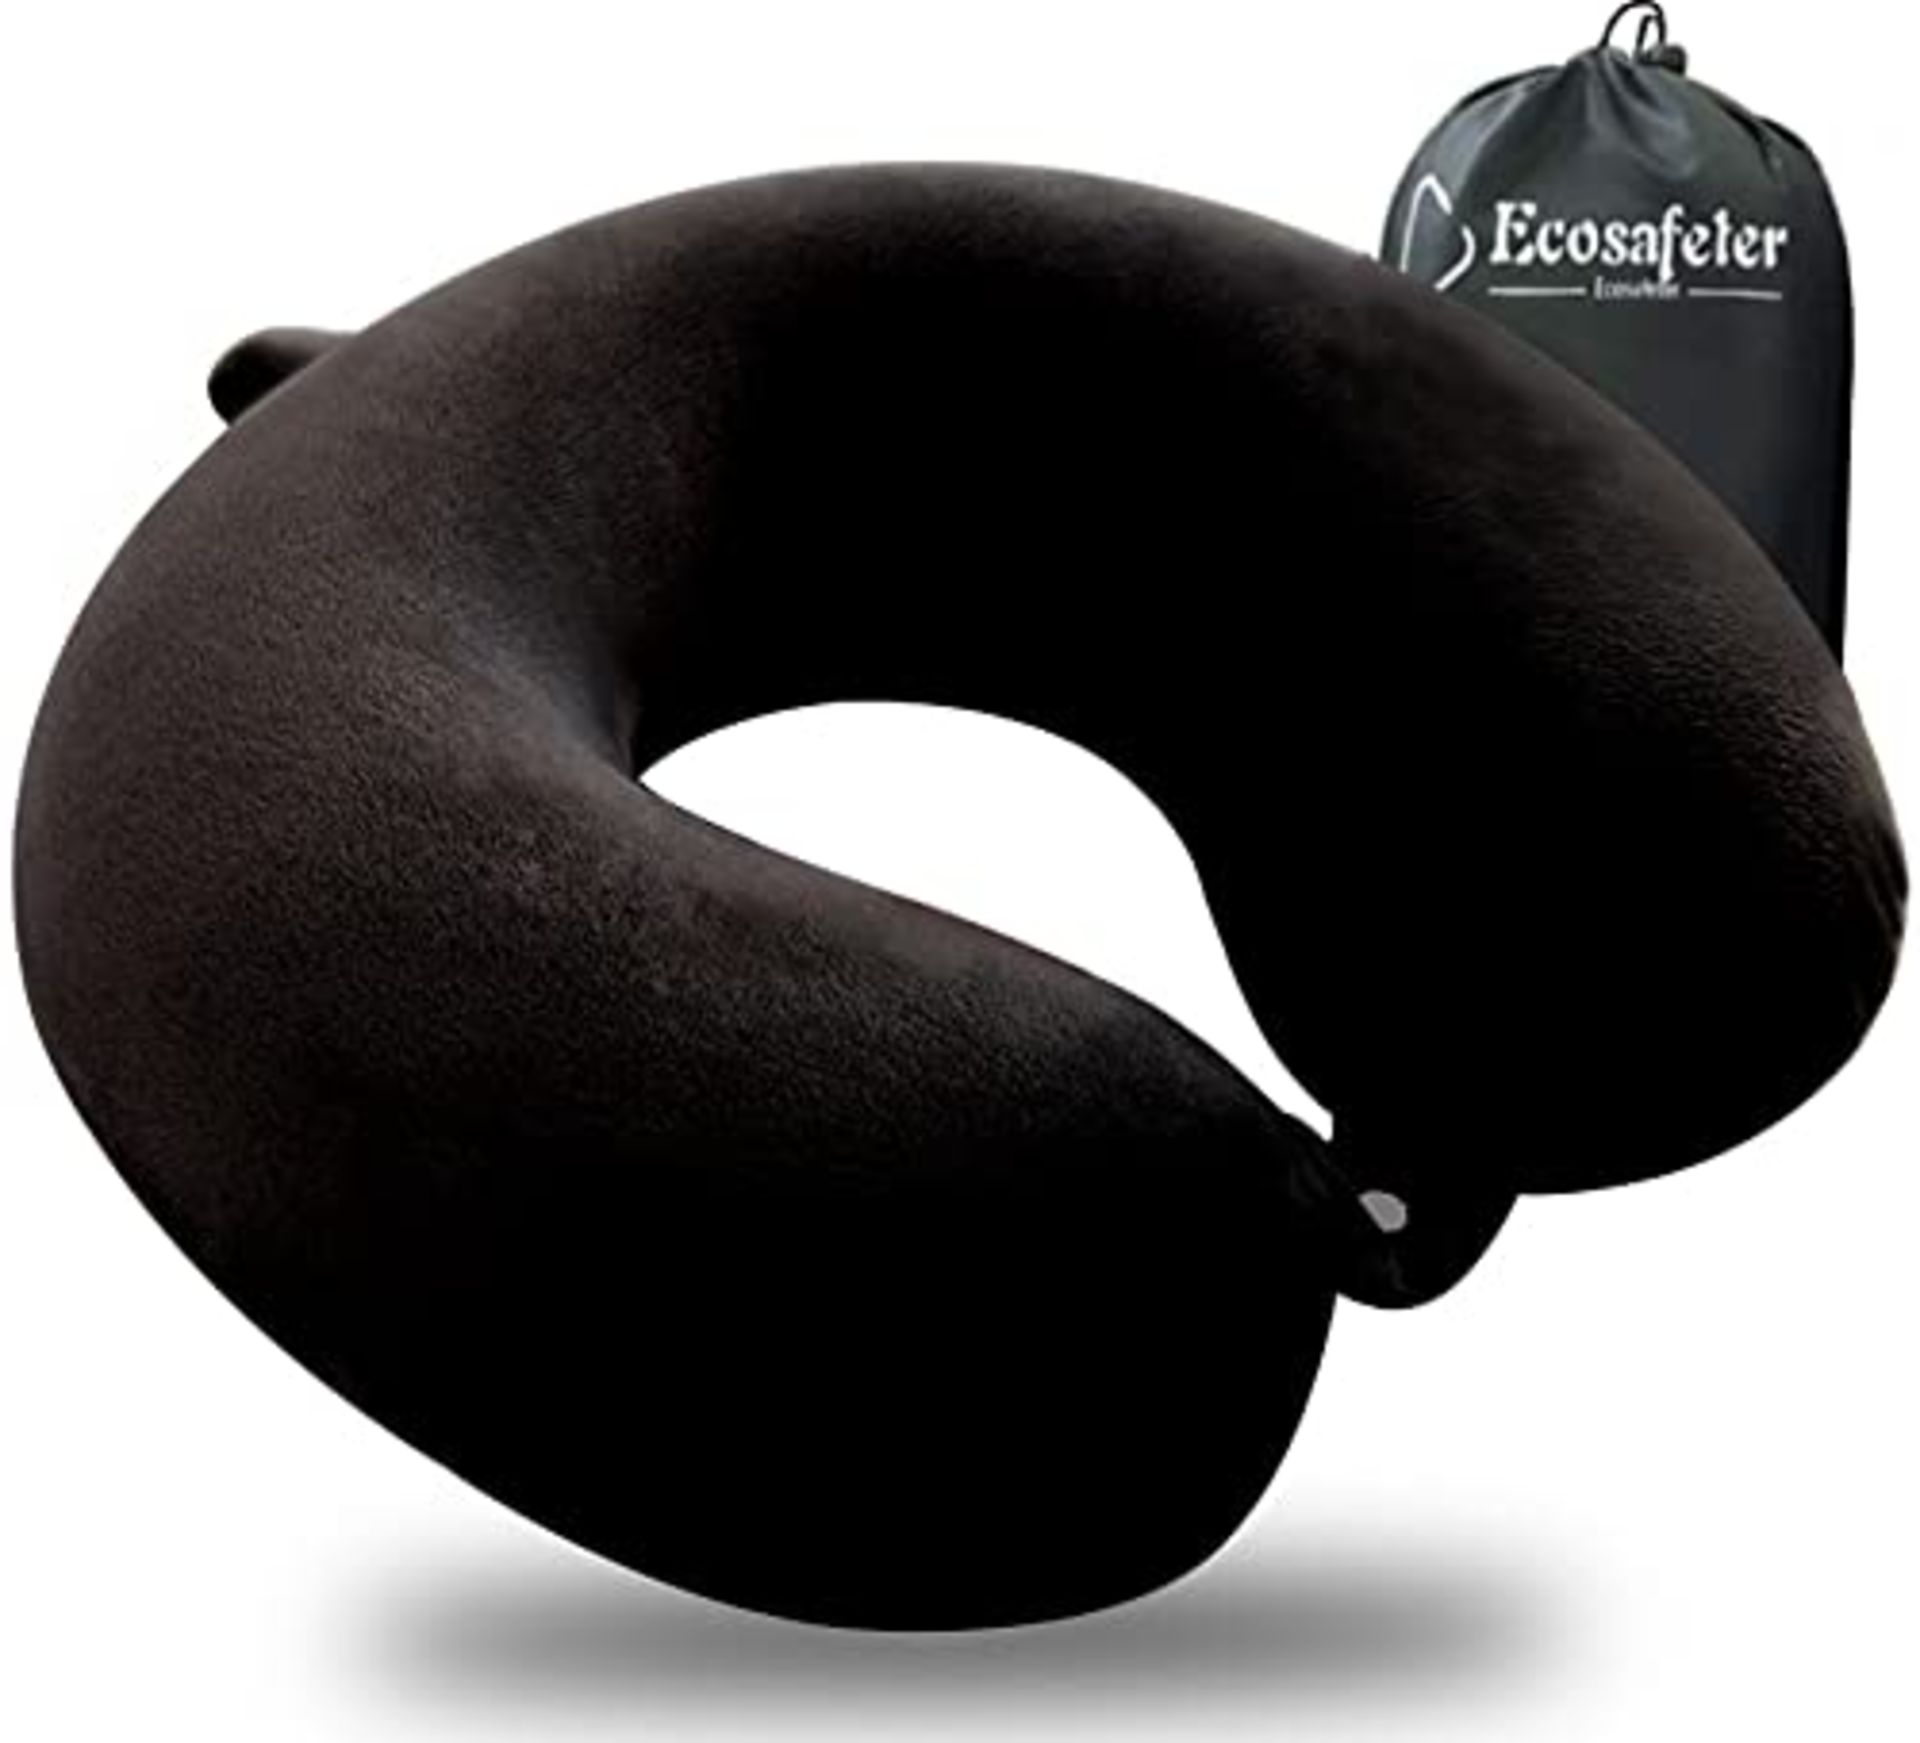 RRP £13.28 Ecosafeter Portable Travel Pillow - Perfect Memory Foam Neck Support Pillow